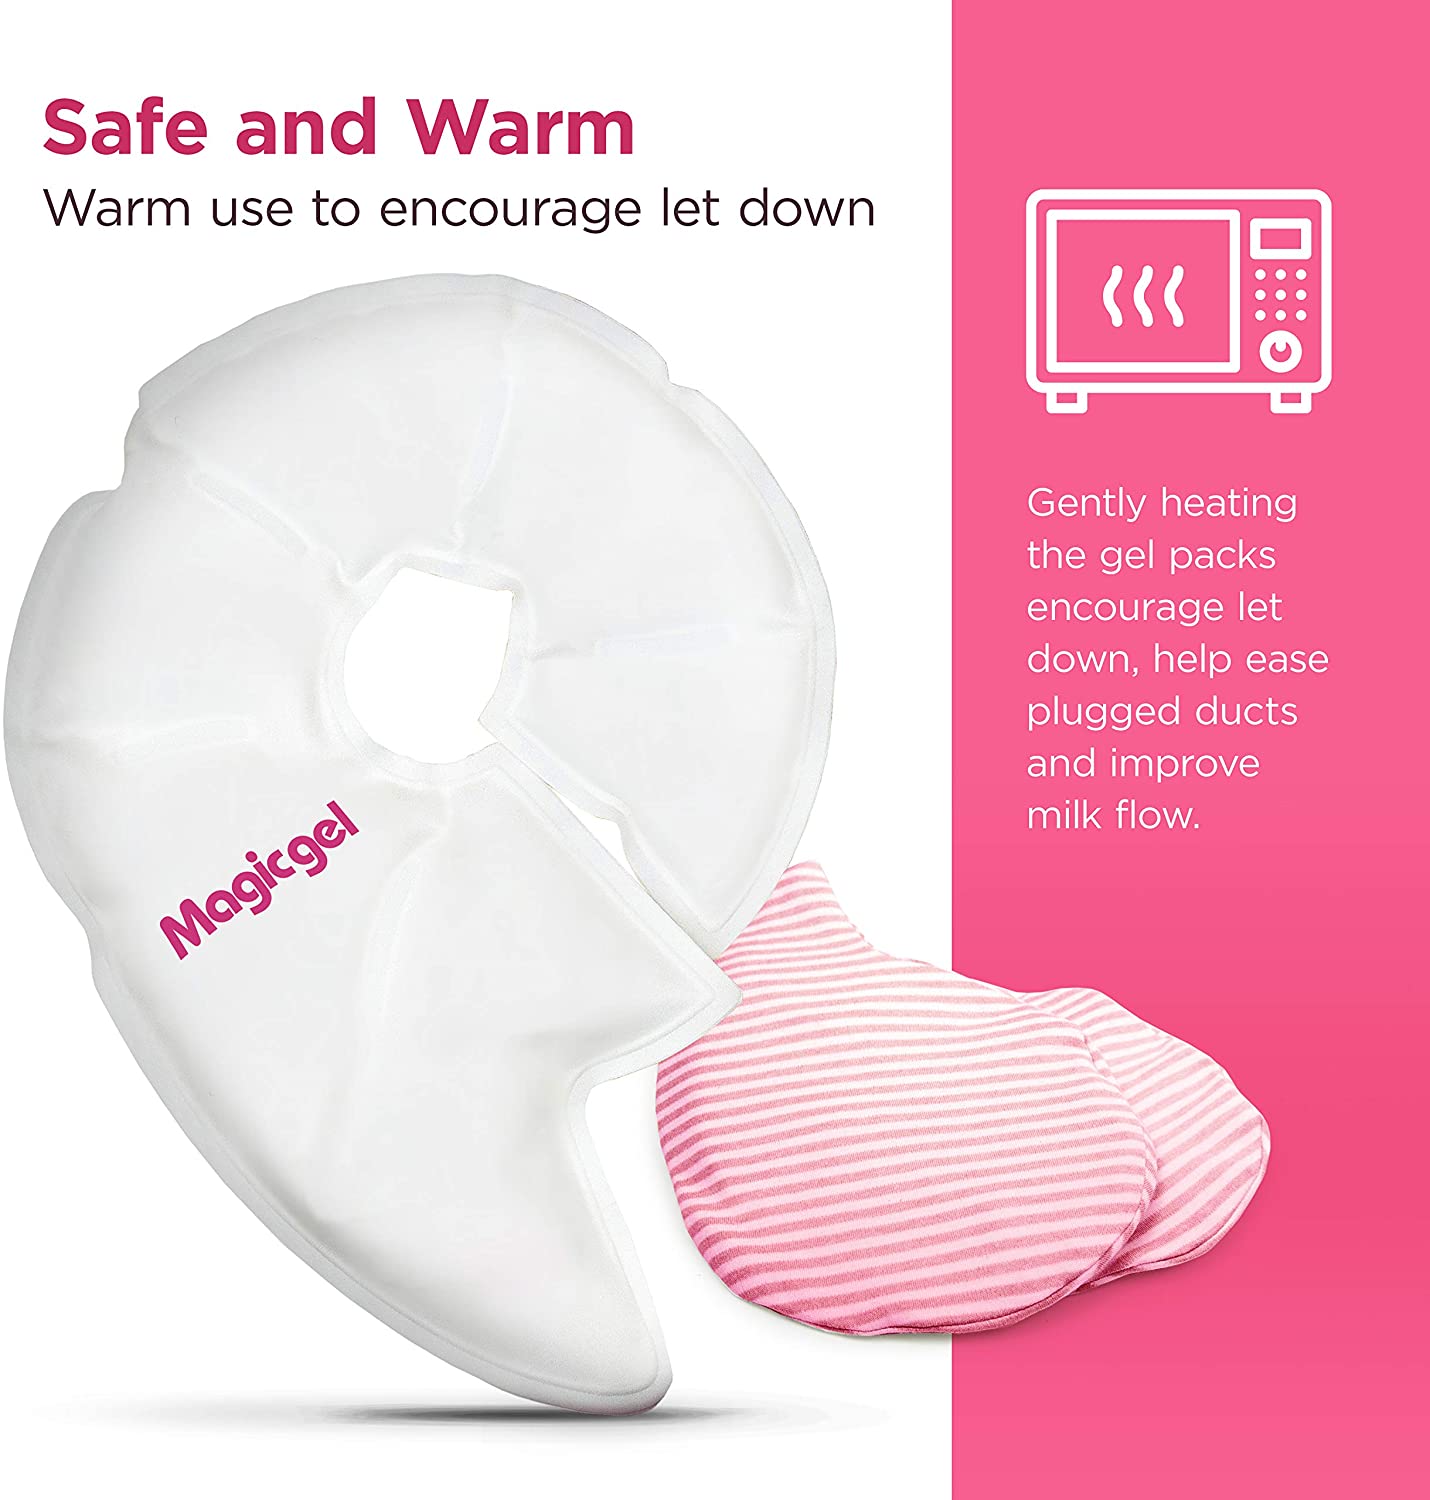 Idaho Jones InstaRelief Breast Therapy Pack - 2 Hot Cold Gel Ice Packs for Freezing, Warm Compress and Mastitis Relief. Soft Gel Breastfeeding Ice